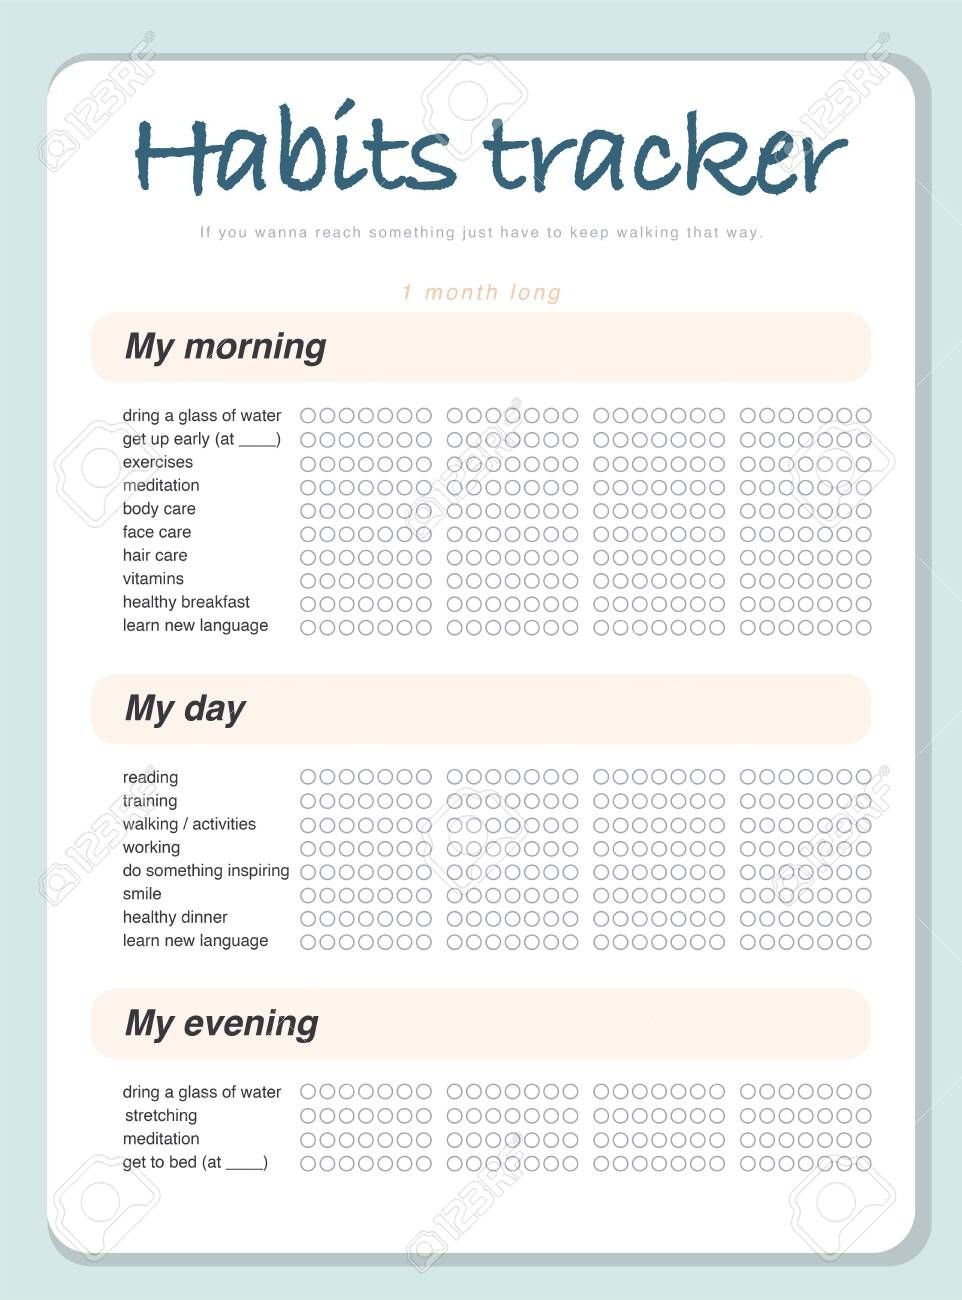 vector habits tracker page design template calendar for month